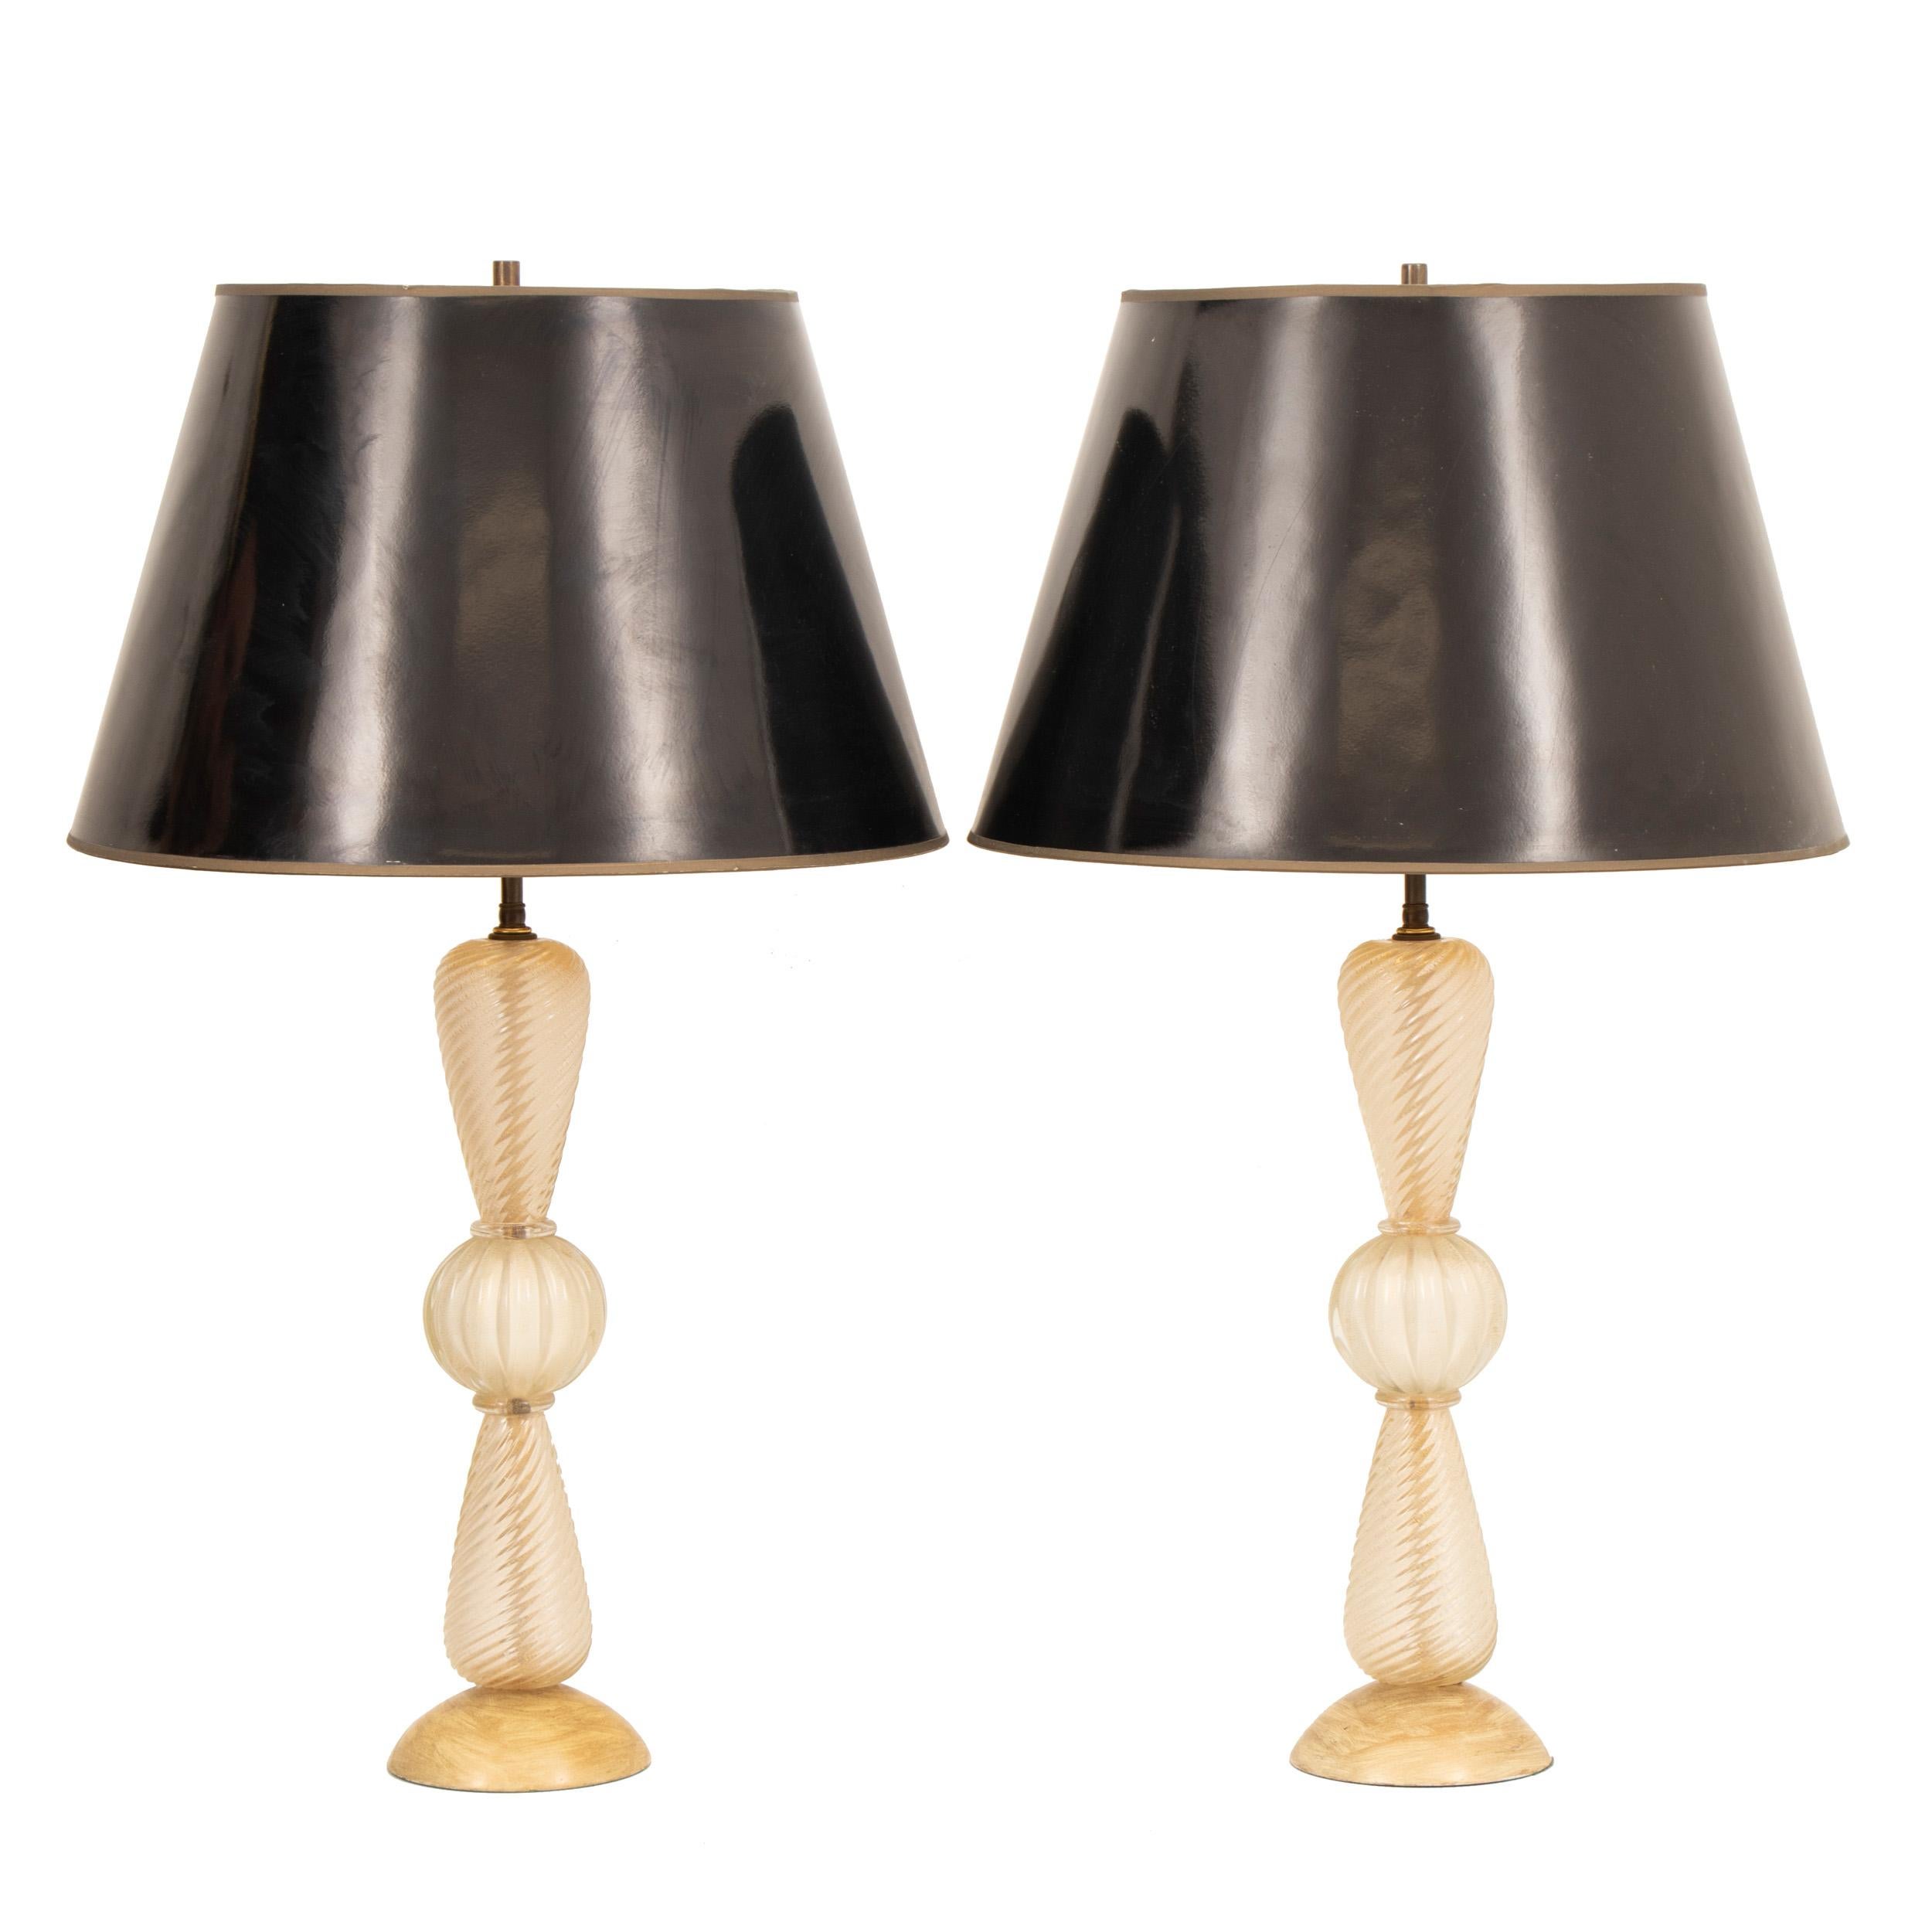 A stunning pair of 1950s Barovier & Toso Italian Murano glass table lamps with an unusual swirl design with gold flecked interiors. The lamps retain their original black gloss shades with gold foil interior. The wooden base has been hand painted